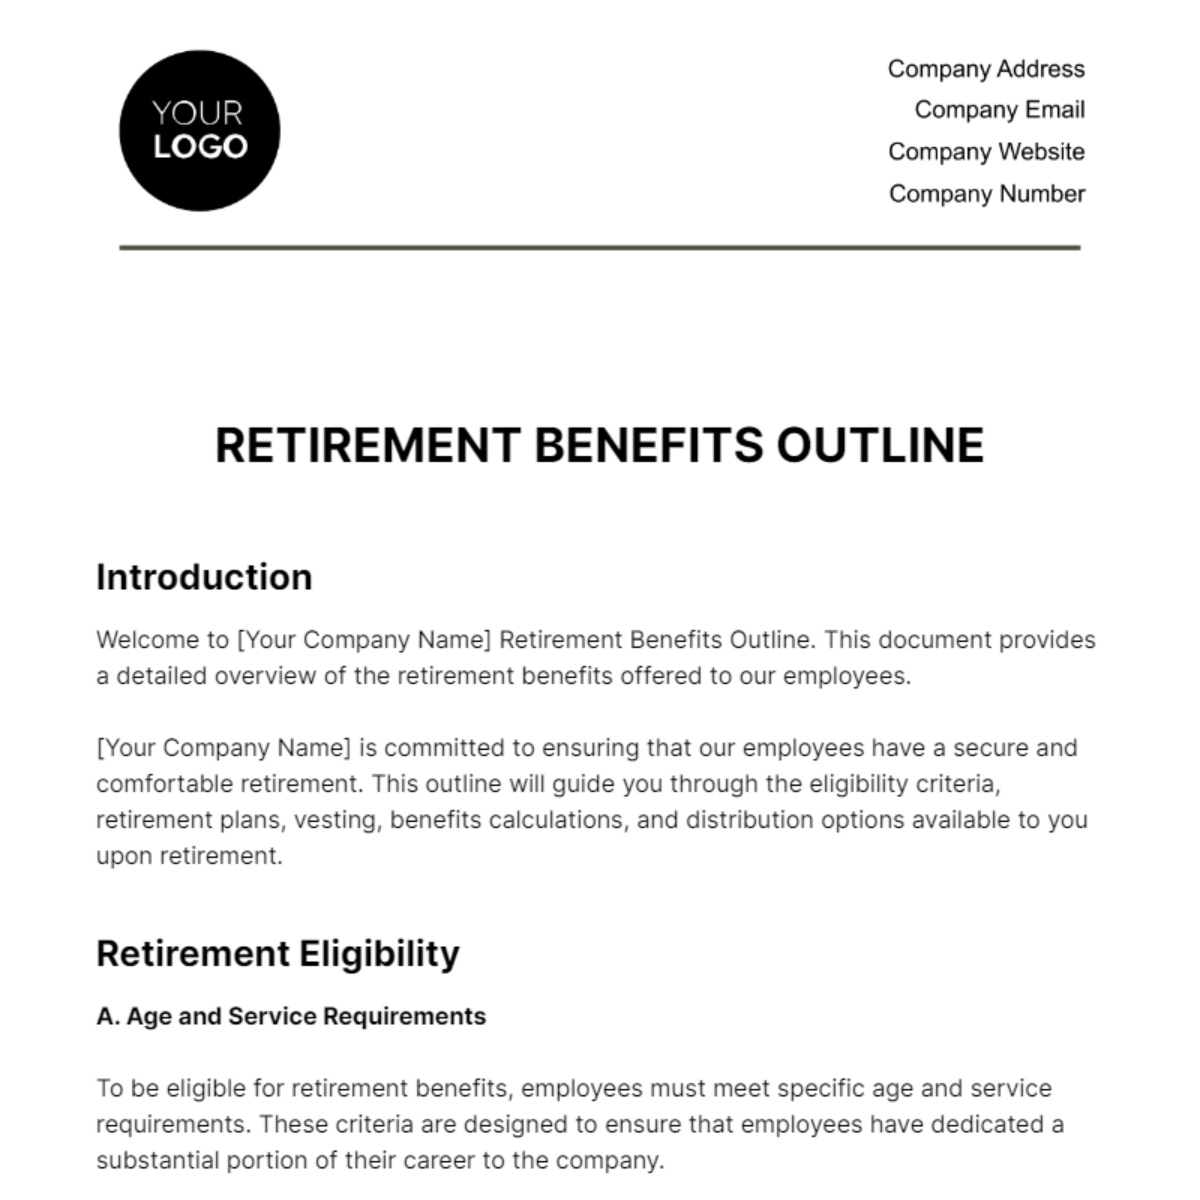 Free Retirement Benefits Outline HR Template